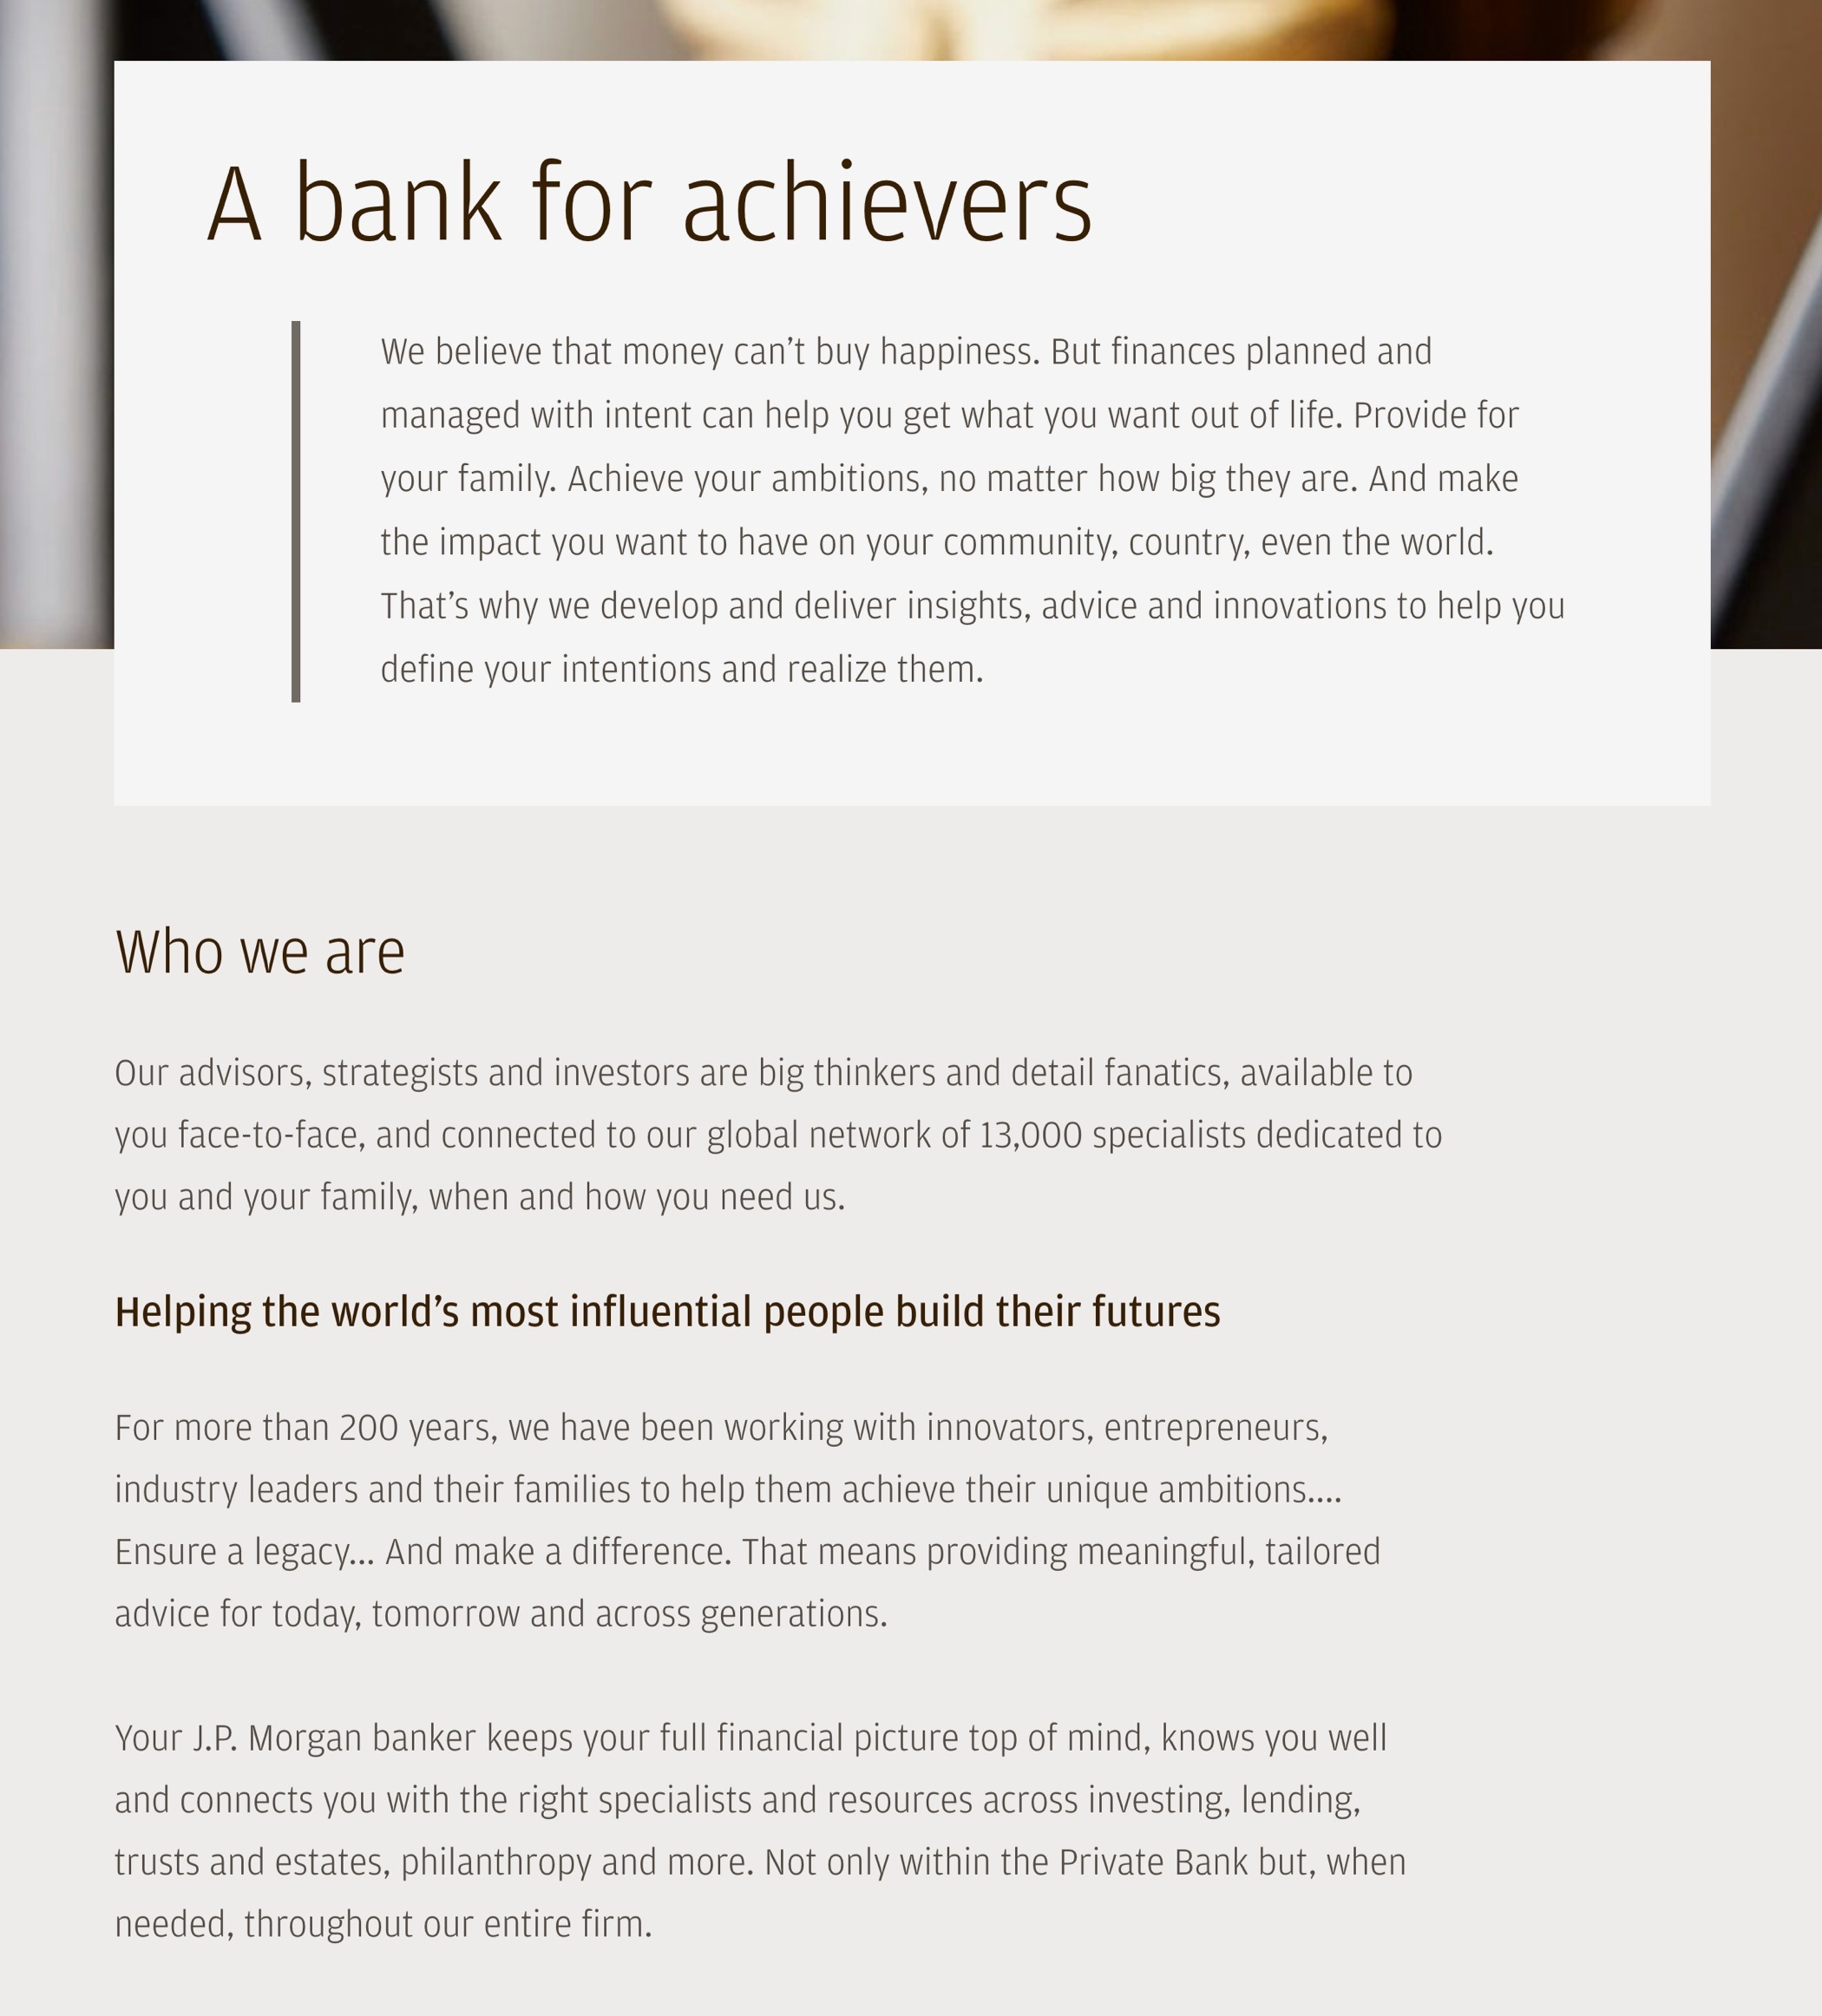 J.P. Morgan Private Bank About  Us web page with headline "The bank for achievers."